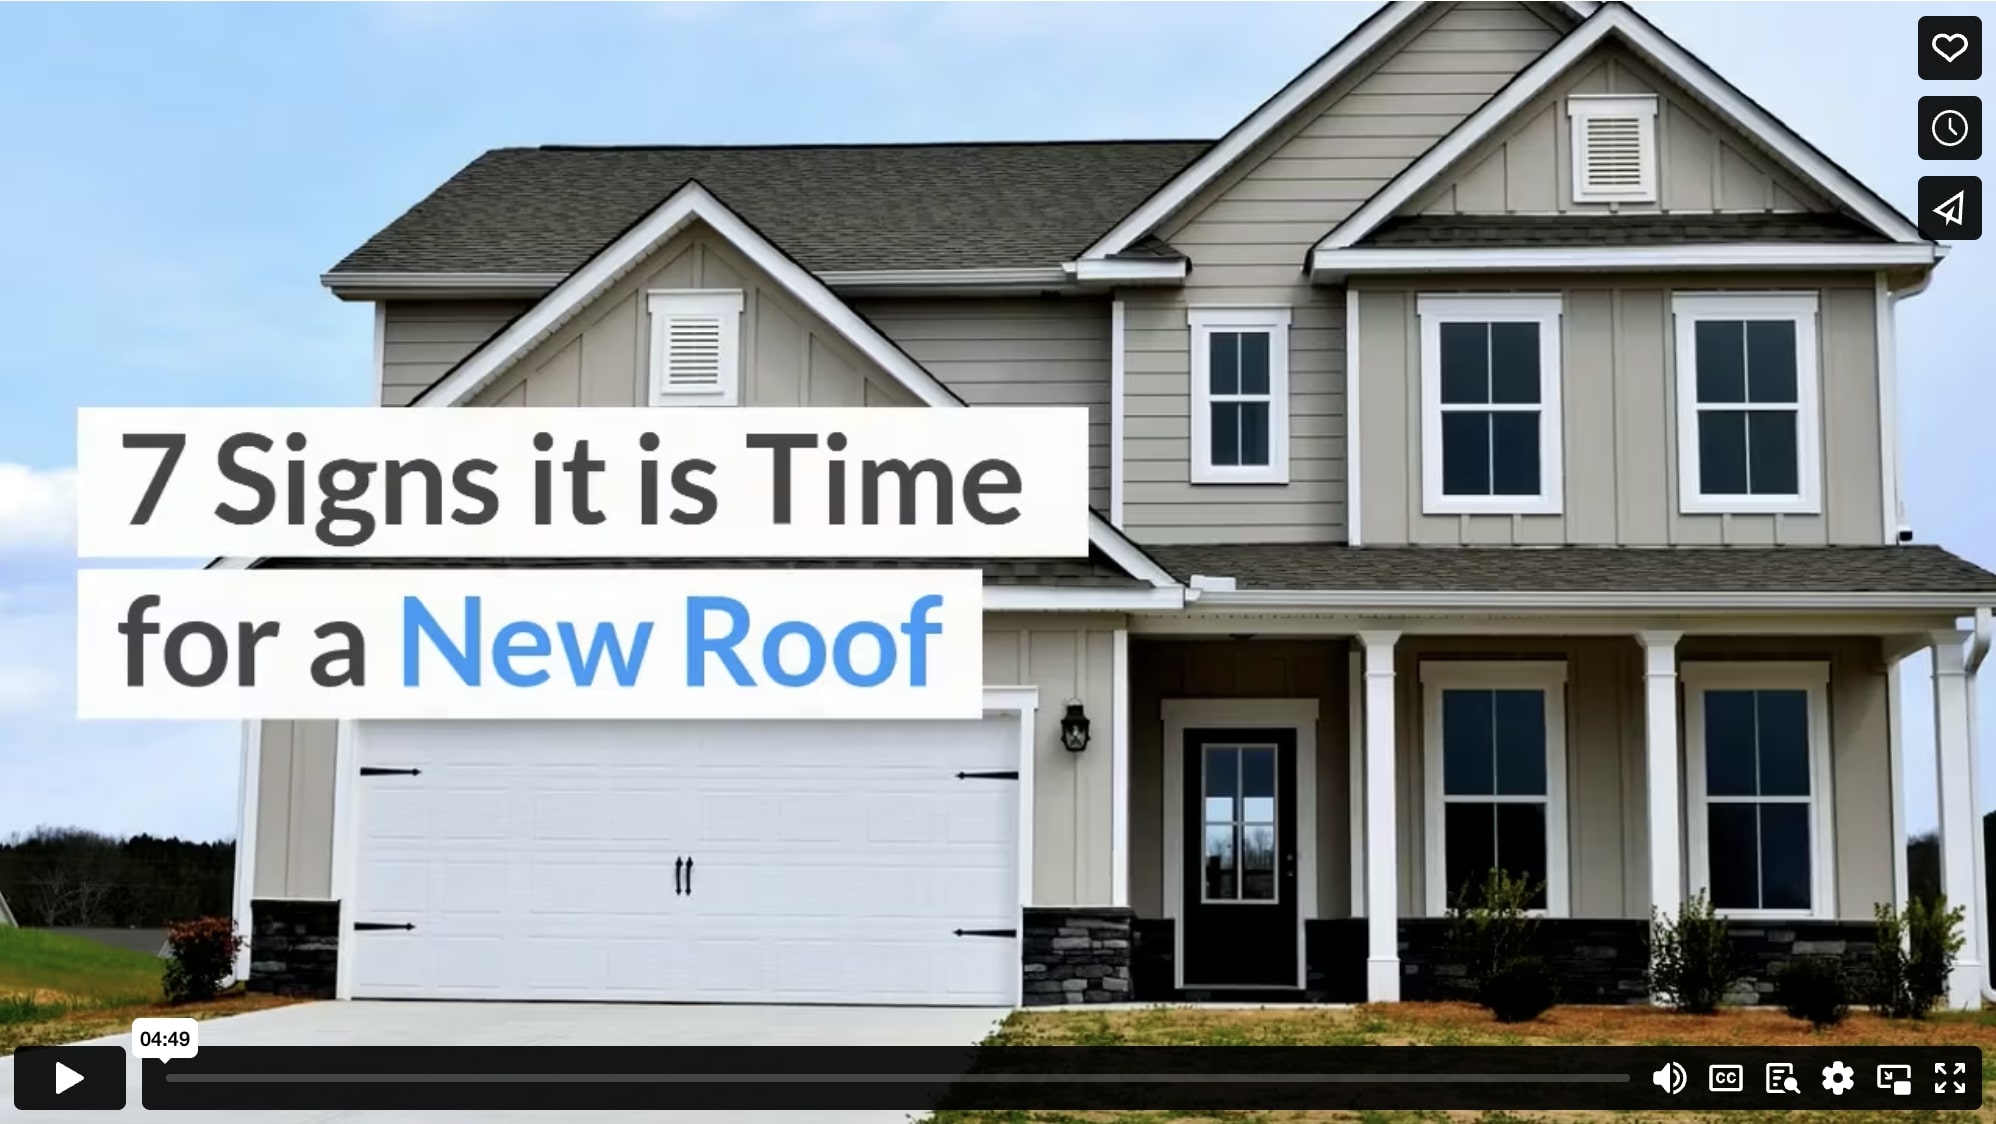 7 Signs it is Time for a New Roof